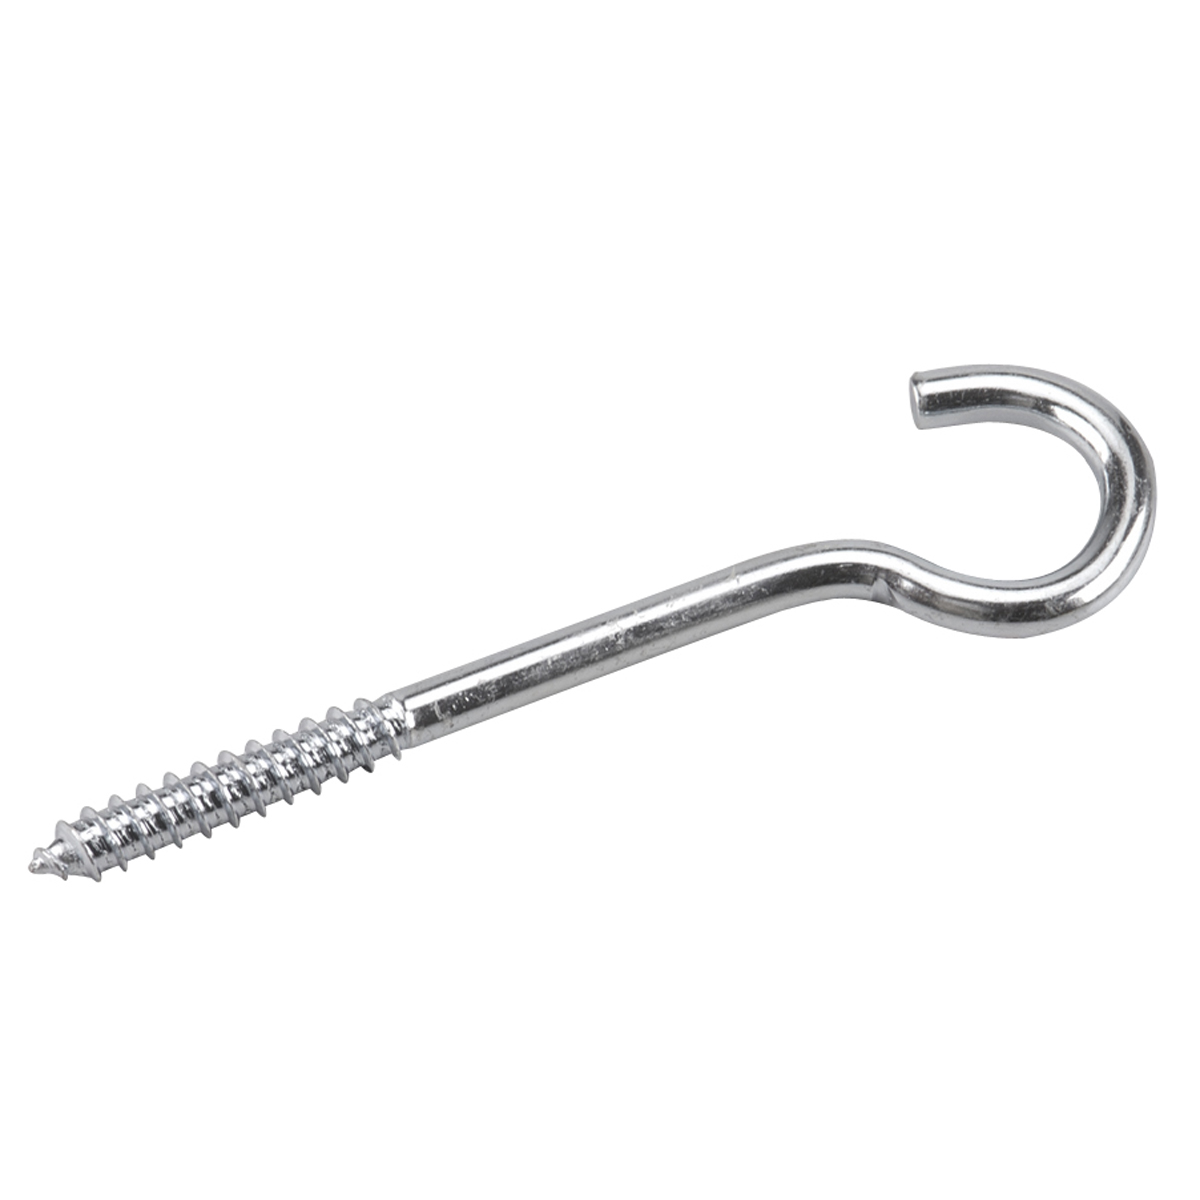 Screw Hook with Lag Thread  - 5/16-in x 6-in